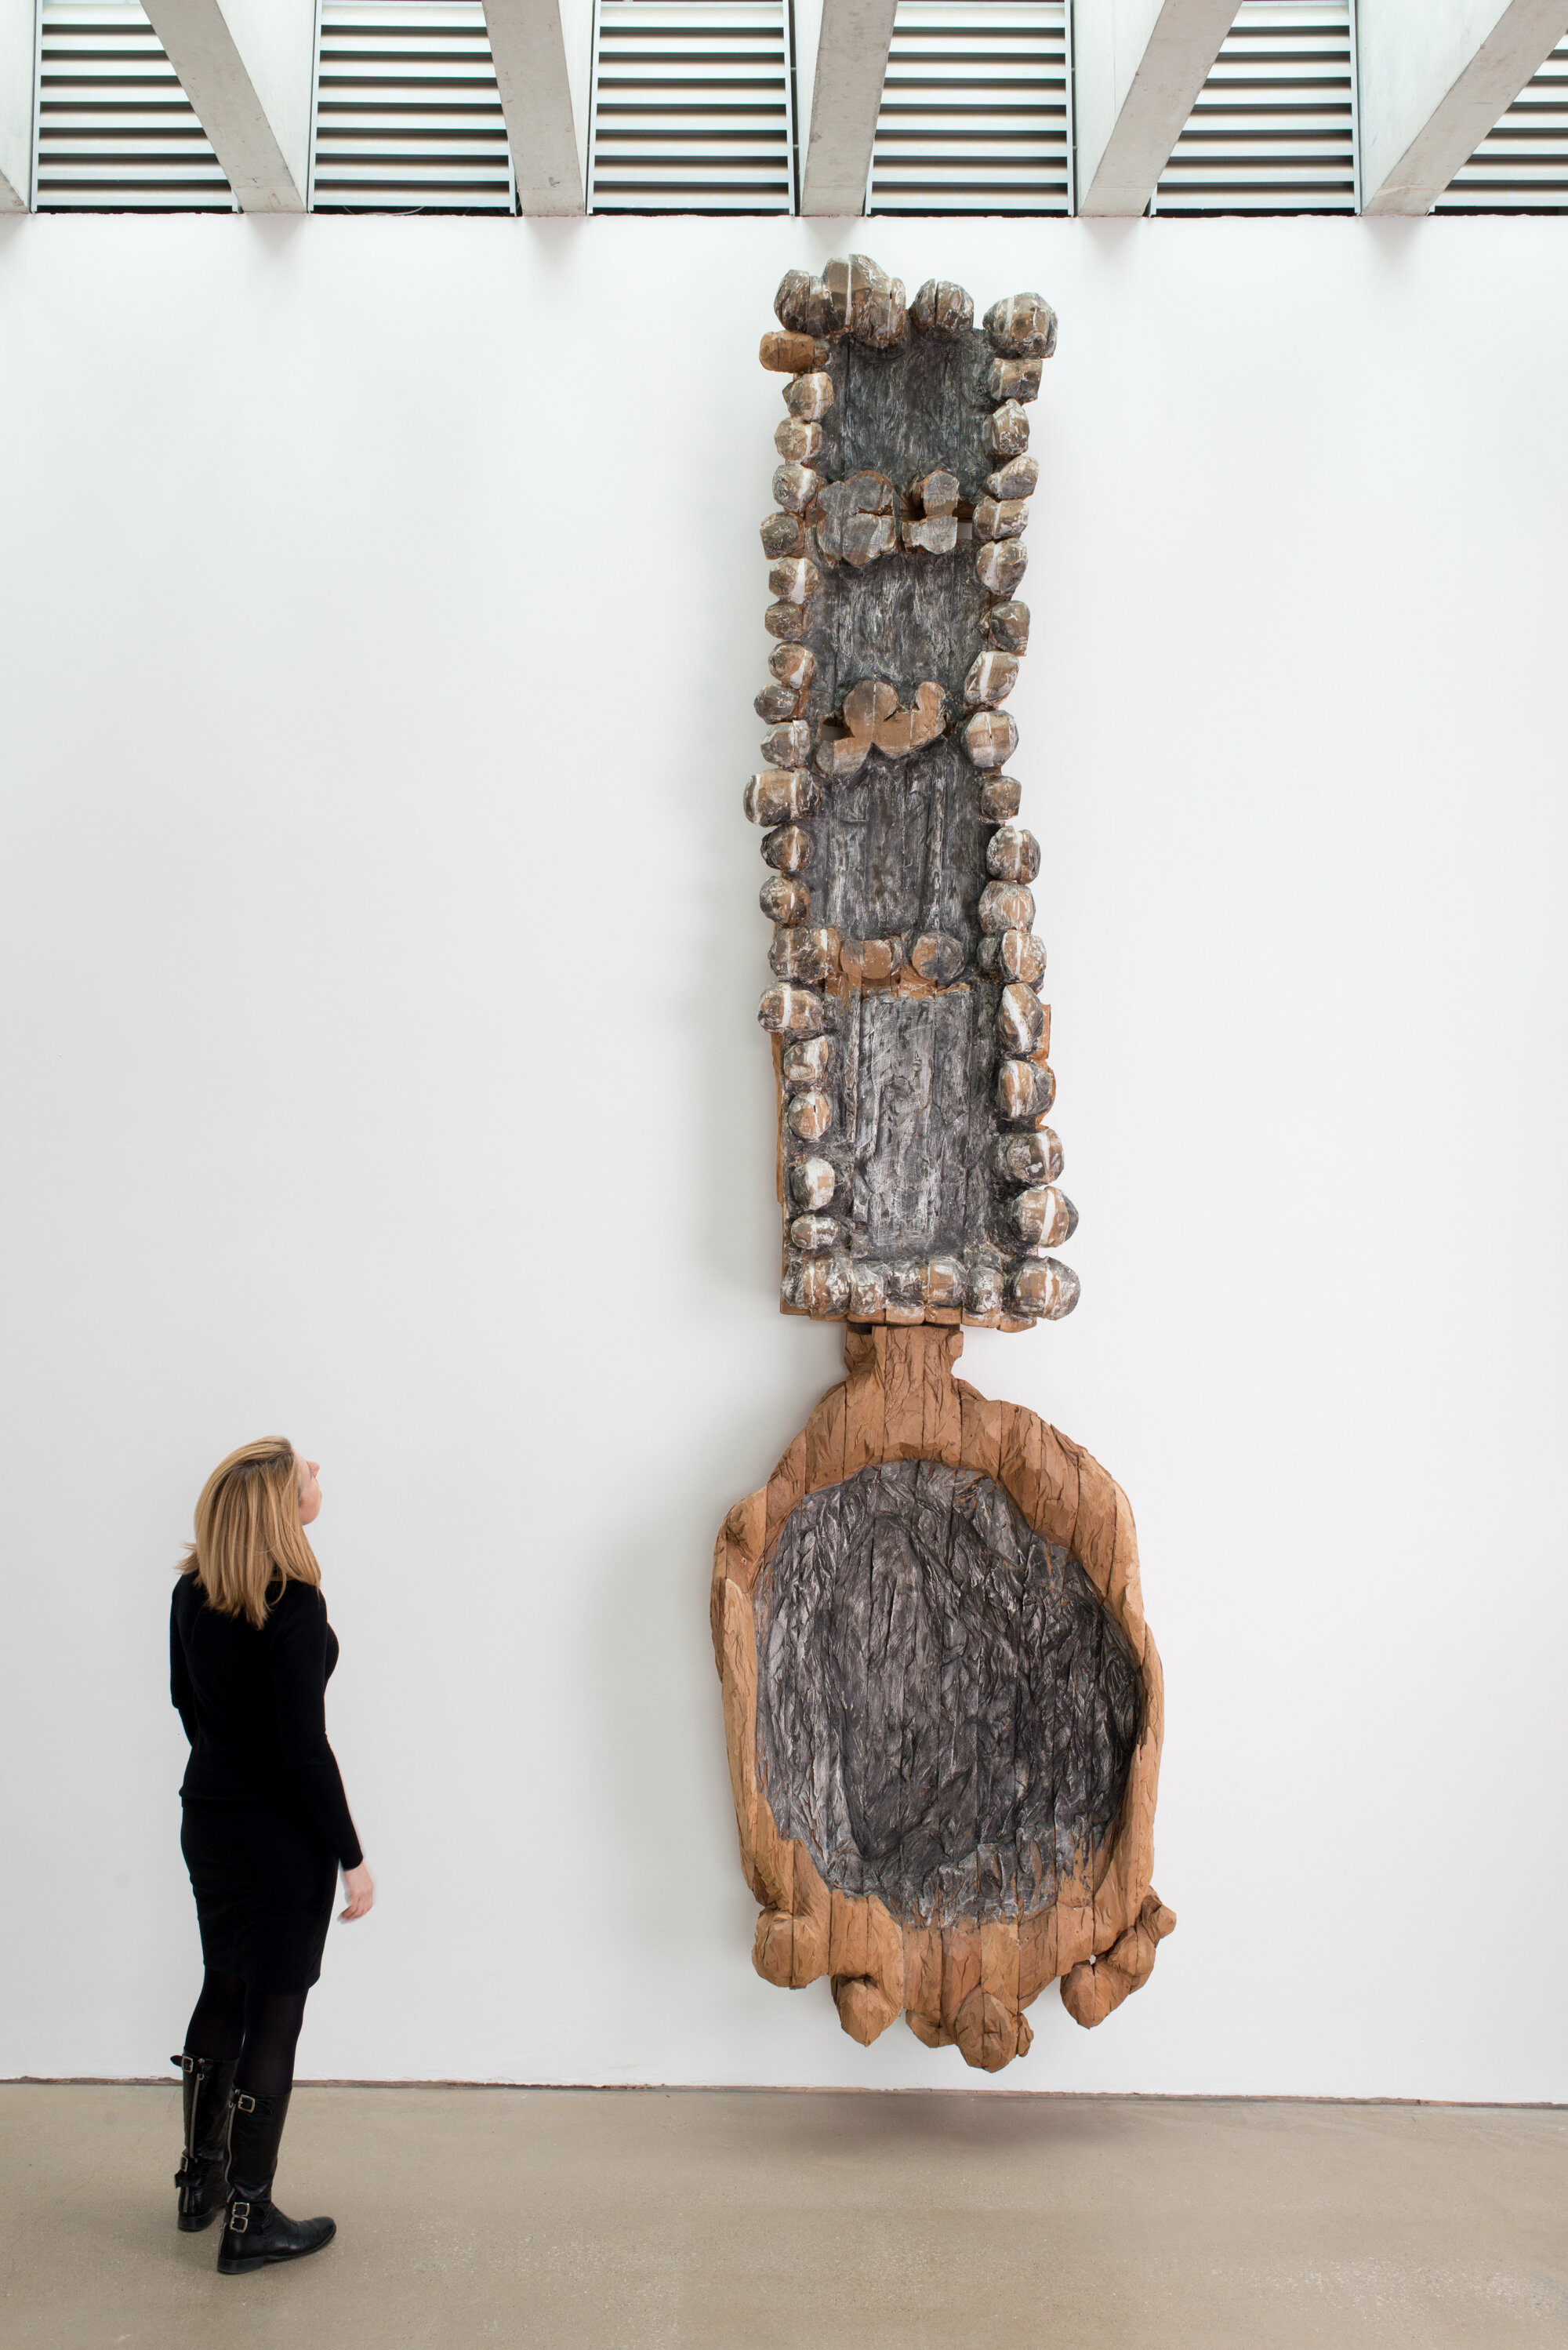       large spoon with split balls,  2006-2012 Cedar, graphite, ink, and plaster 162 x 44 x 19 in.    MORE IMAGES   Yorkshire Sculpture Park  